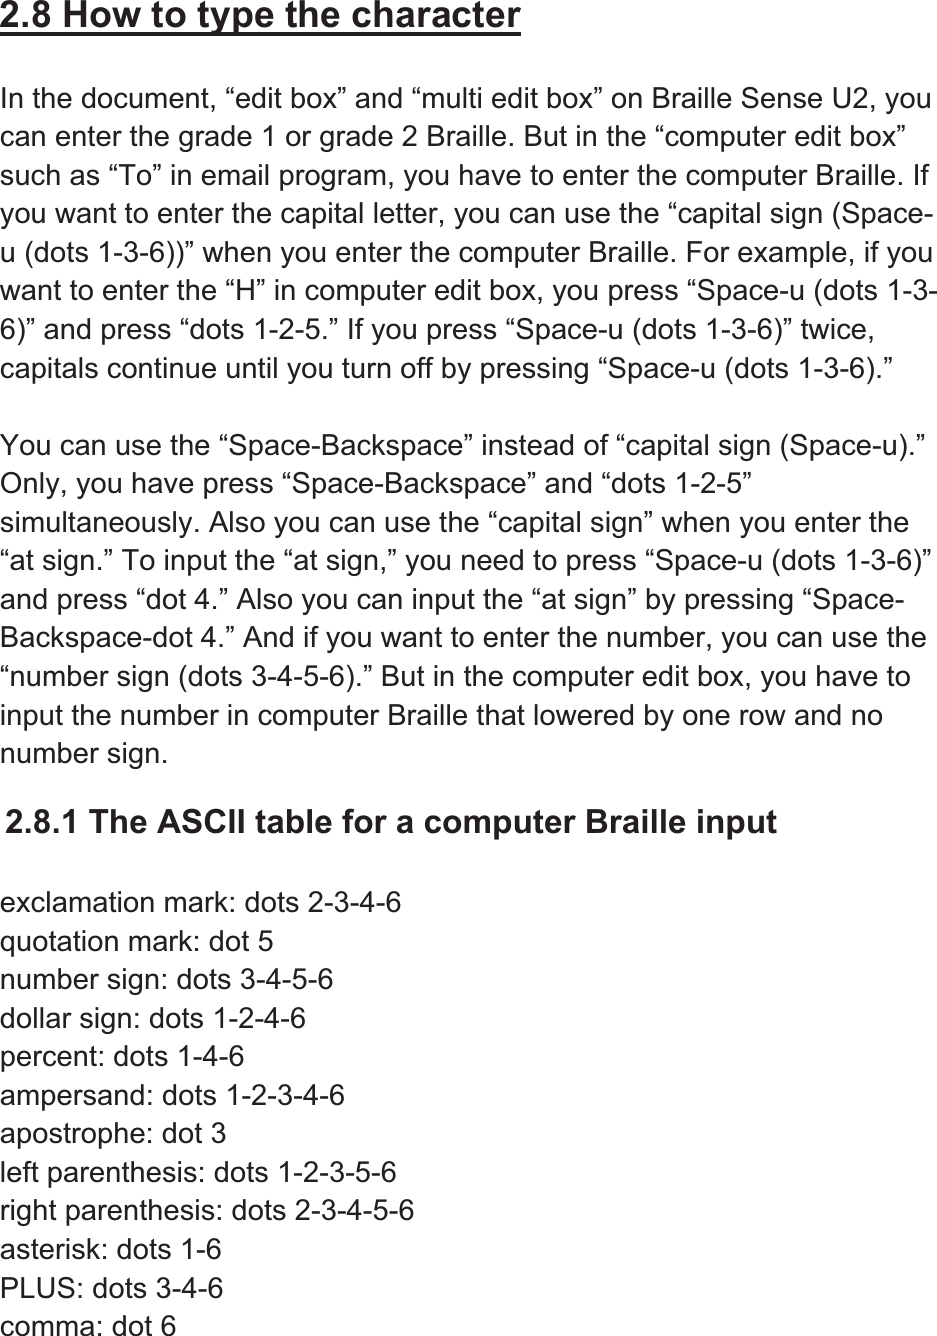 2.8 How to type the characterIn the document, “edit box” and “multi edit box” on Braille Sense U2, you can enter the grade 1 or grade 2 Braille. But in the “computer edit box” such as “To” in email program, you have to enter the computer Braille. If you want to enter the capital letter, you can use the “capital sign (Space-u (dots 1-3-6))” when you enter the computer Braille. For example, if you want to enter the “H” in computer edit box, you press “Space-u (dots 1-3-6)” and press “dots 1-2-5.” If you press “Space-u (dots 1-3-6)” twice, capitals continue until you turn off by pressing “Space-u (dots 1-3-6).” You can use the “Space-Backspace” instead of “capital sign (Space-u).” Only, you have press “Space-Backspace” and “dots 1-2-5” simultaneously. Also you can use the “capital sign” when you enter the “at sign.” To input the “at sign,” you need to press “Space-u (dots 1-3-6)” and press “dot 4.” Also you can input the “at sign” by pressing “Space-Backspace-dot 4.” And if you want to enter the number, you can use the “number sign (dots 3-4-5-6).” But in the computer edit box, you have to input the number in computer Braille that lowered by one row and no number sign.2.8.1 The ASCII table for a computer Braille input exclamation mark: dots 2-3-4-6 quotation mark: dot 5 number sign: dots 3-4-5-6 dollar sign: dots 1-2-4-6 percent: dots 1-4-6 ampersand: dots 1-2-3-4-6 apostrophe: dot 3 left parenthesis: dots 1-2-3-5-6 right parenthesis: dots 2-3-4-5-6 asterisk: dots 1-6 PLUS: dots 3-4-6 comma: dot 6 